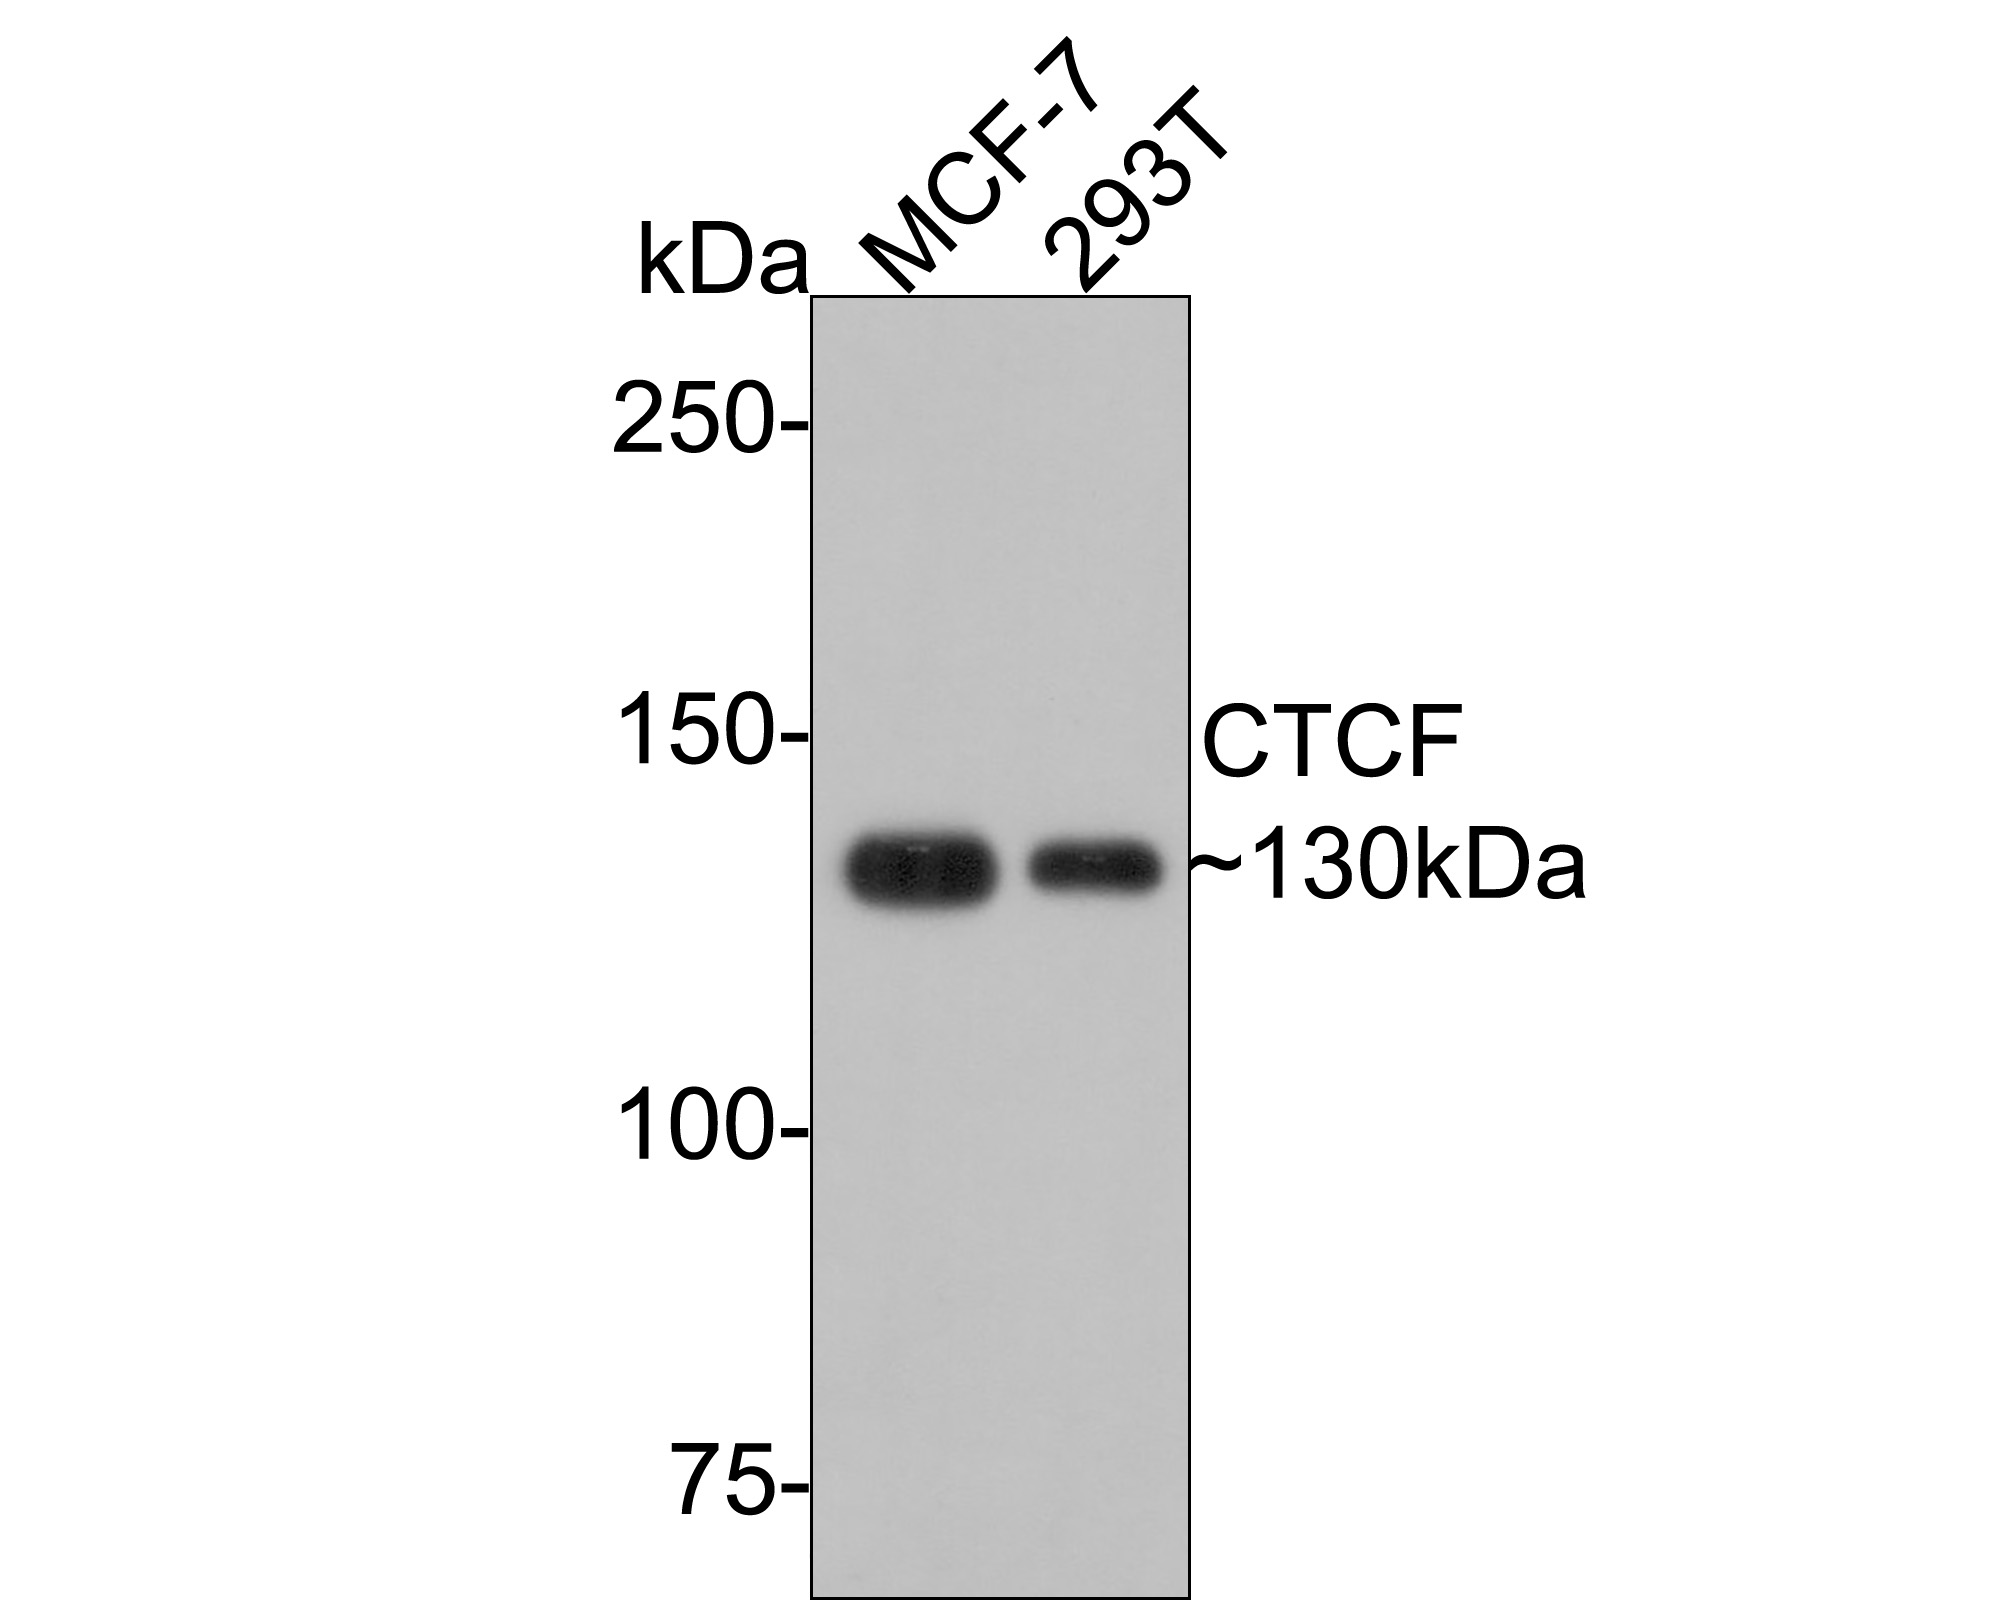 Western blot analysis of CTCF on MCF-7 cell lysates. Proteins were transferred to a PVDF membrane and blocked with 5% BSA in PBS for 1 hour at room temperature. The primary antibody (ET1703-90, 1/500) was used in 5% BSA at room temperature for 2 hours. Goat Anti-Rabbit IgG - HRP Secondary Antibody (HA1001) at 1:5,000 dilution was used for 1 hour at room temperature.